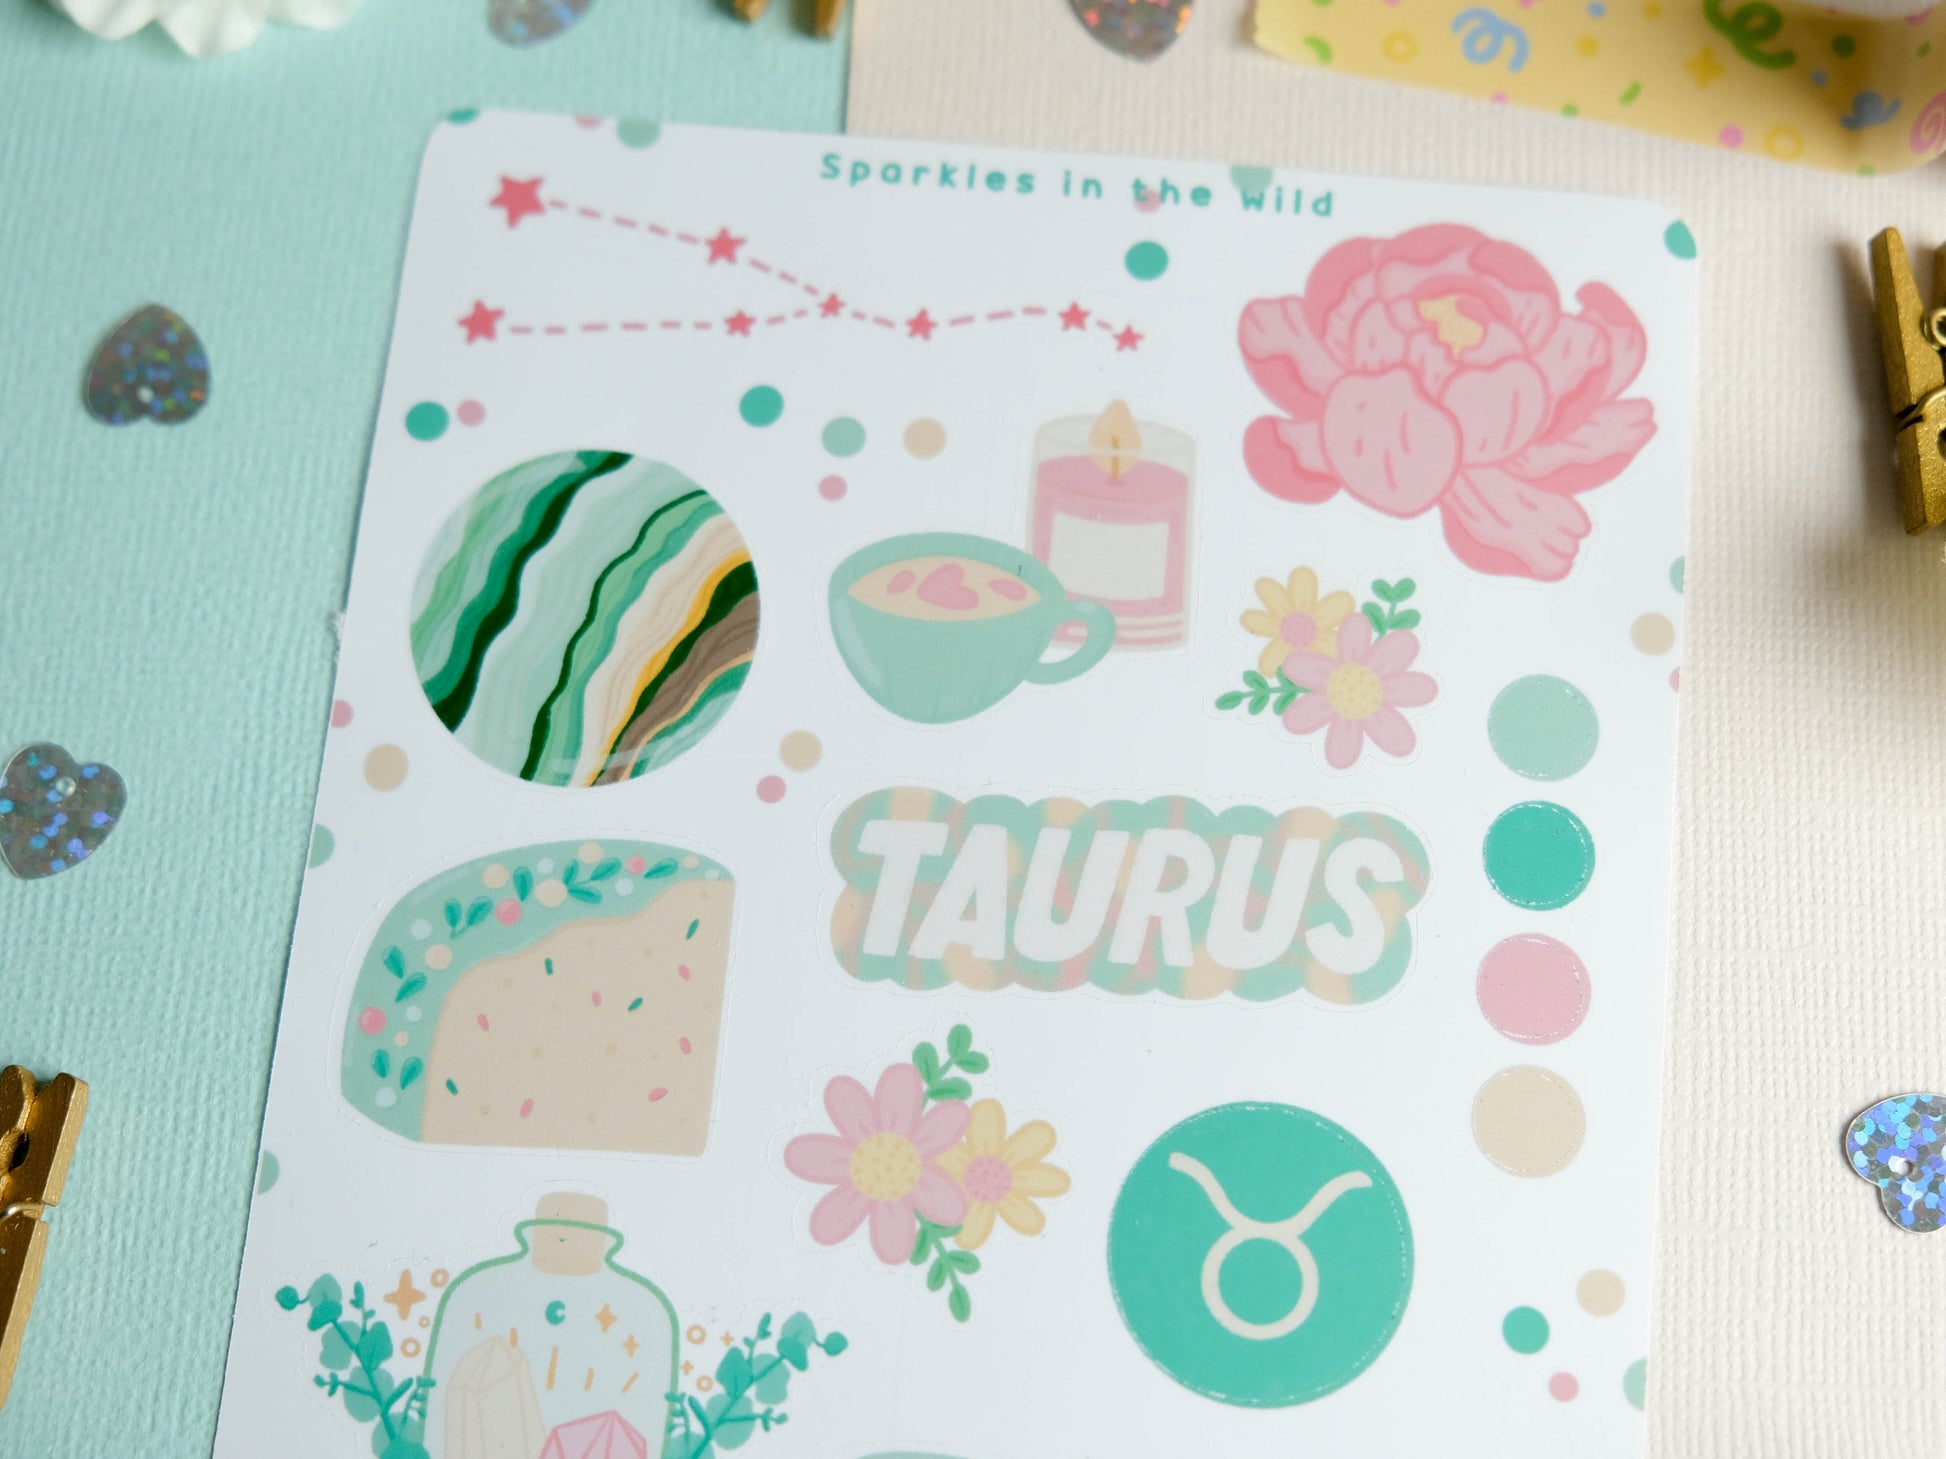 Sticker sheet Taurus astrology enthusiasts - Add a personal touch to your favorite items with this unique collection of Taurus stickers